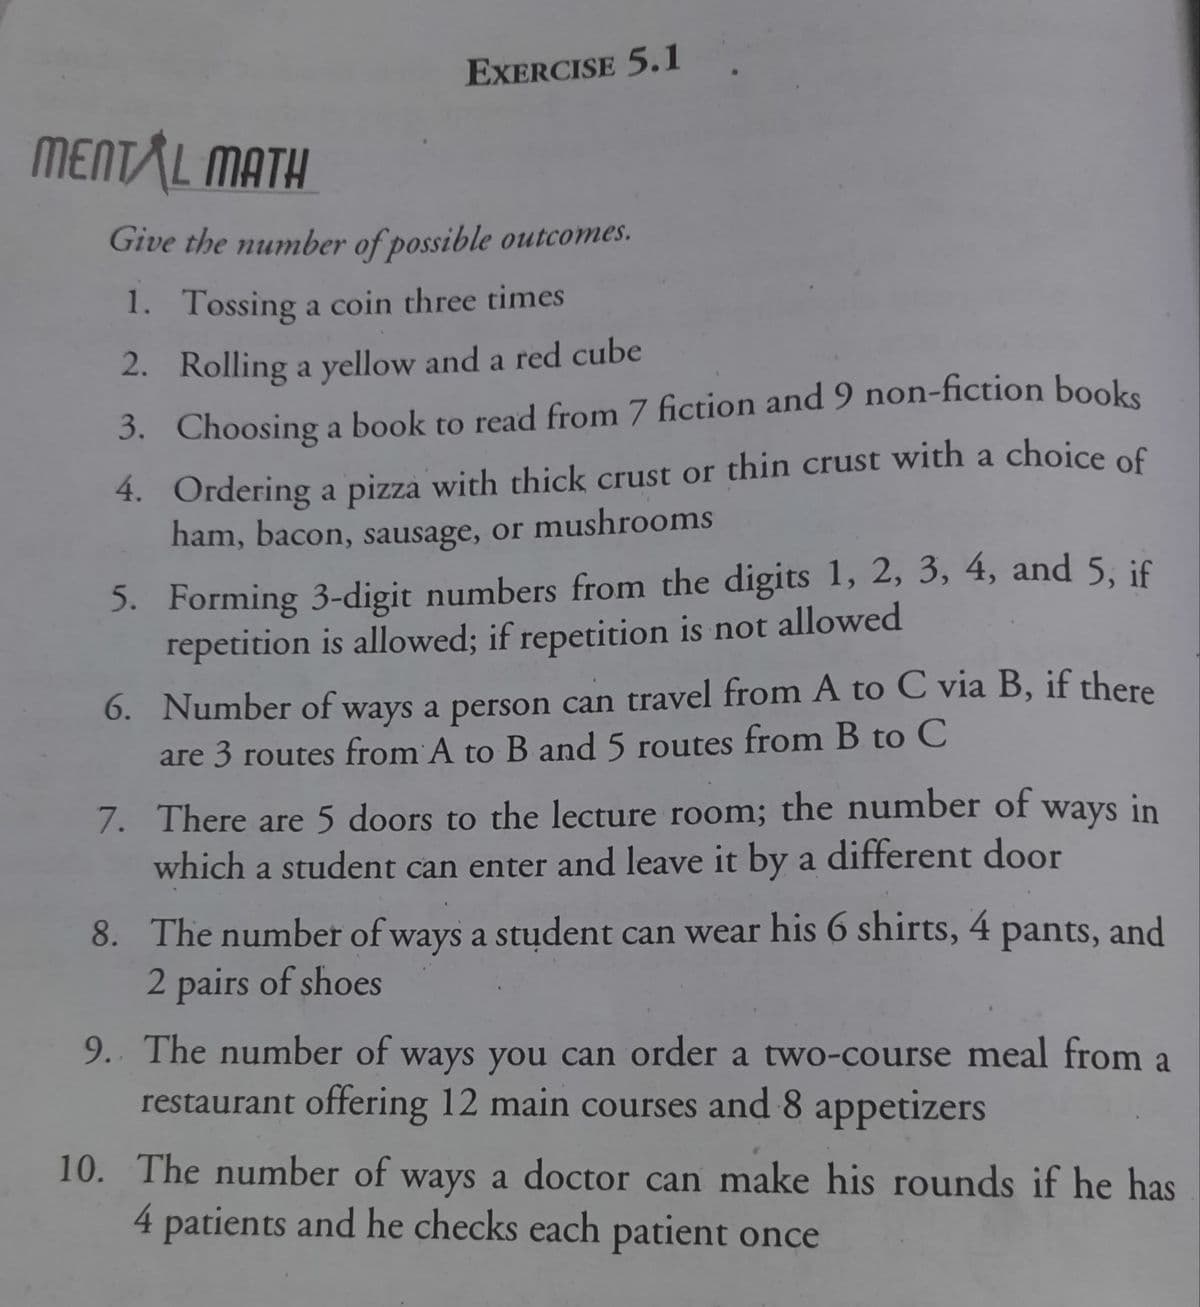 EXERCISE 5.1
MENTAL MATH
Give the number of possible outcomes.
1. Tossing a coin three times
2. Rolling a yellow and a red cube
3. Choosing a book to read from 7 fiction and 9 non-fiction books
4. Ordering a pizza with thick crust or thin crust with a choice of
ham, bacon, sausage, or mushrooms
5. Forming 3-digit numbers from the digits 1, 2, 3, 4, and 5, if
repetition is allowed; if repetition is not allowed
6. Number of ways a person can travel from A to C via B, if there
are 3 routes from A to B and 5 routes from B to C
7. There are 5 doors to the lecture room; the number of
which a student can enter and leave it by a different door
ways
in
8. The number of ways a student can wear his 6 shirts, 4 pants, and
2 pairs of shoes
9. The number of ways you can order a two-course meal from
a
restaurant offering 12 main courses and 8 appetizers
10. The number of ways a doctor can make his rounds if he has
4 patients and he checks each patient once
